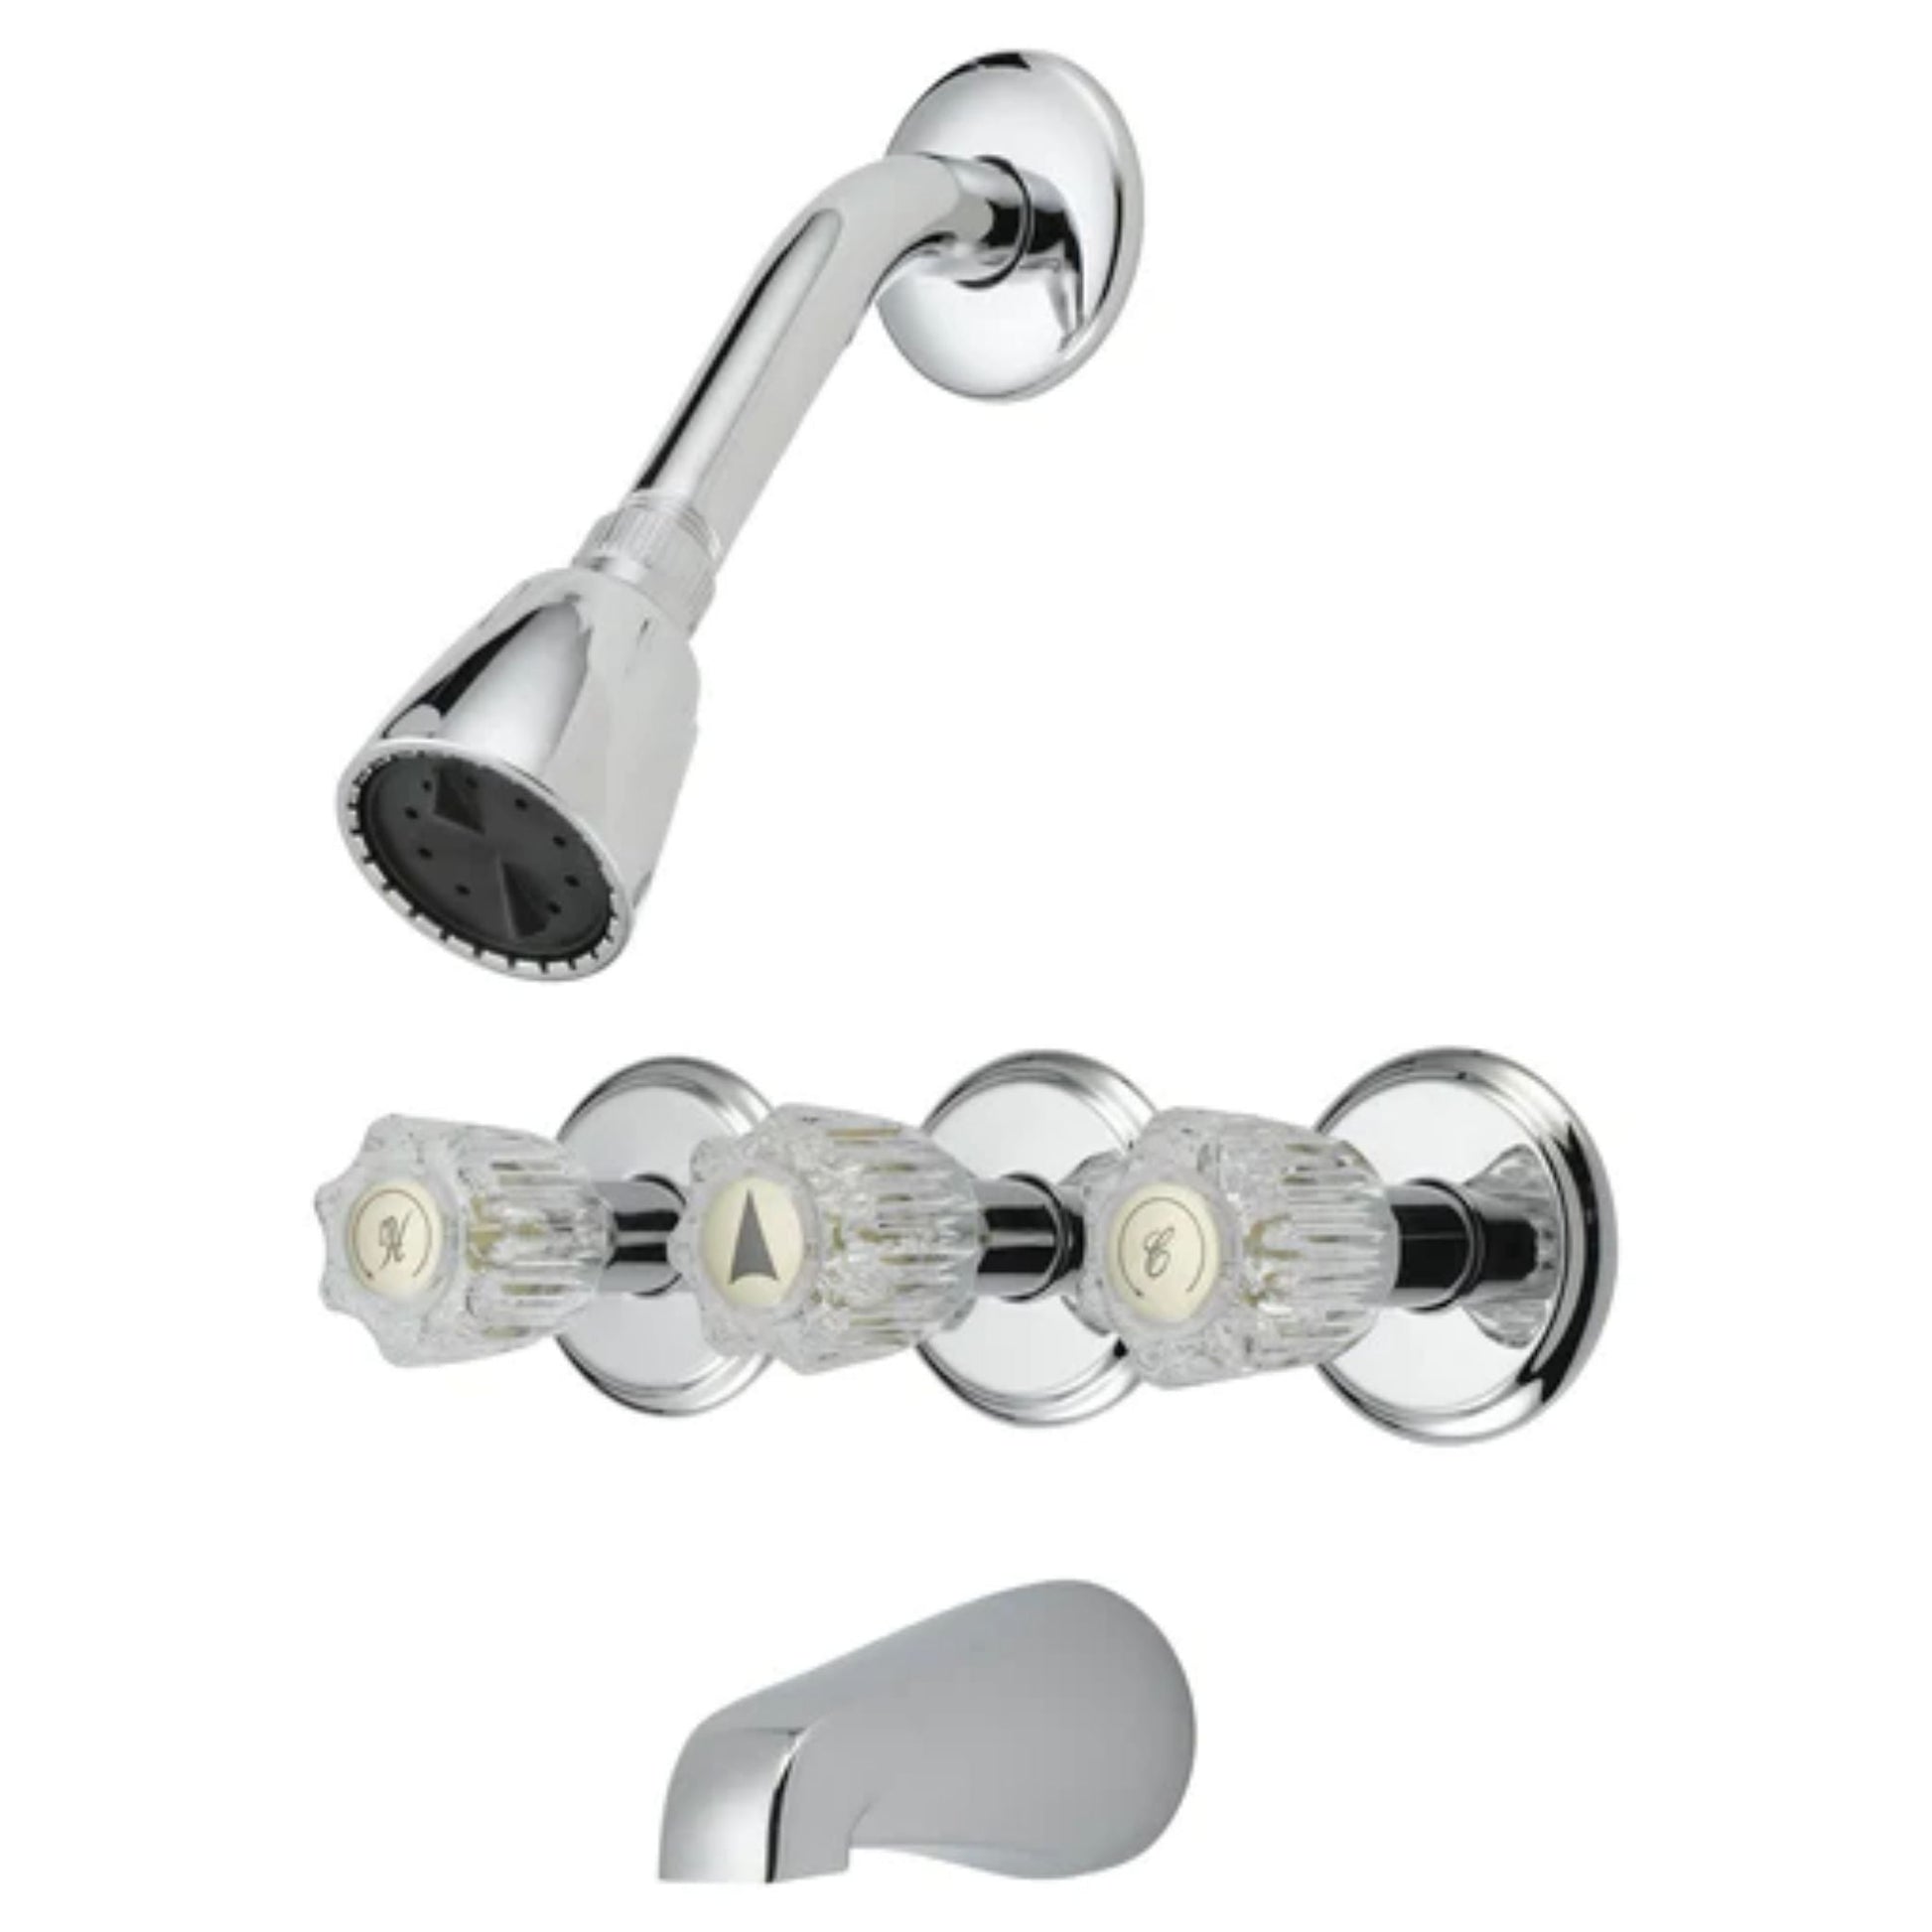 LessCare Shower Head with Tub Faucet - LS1C